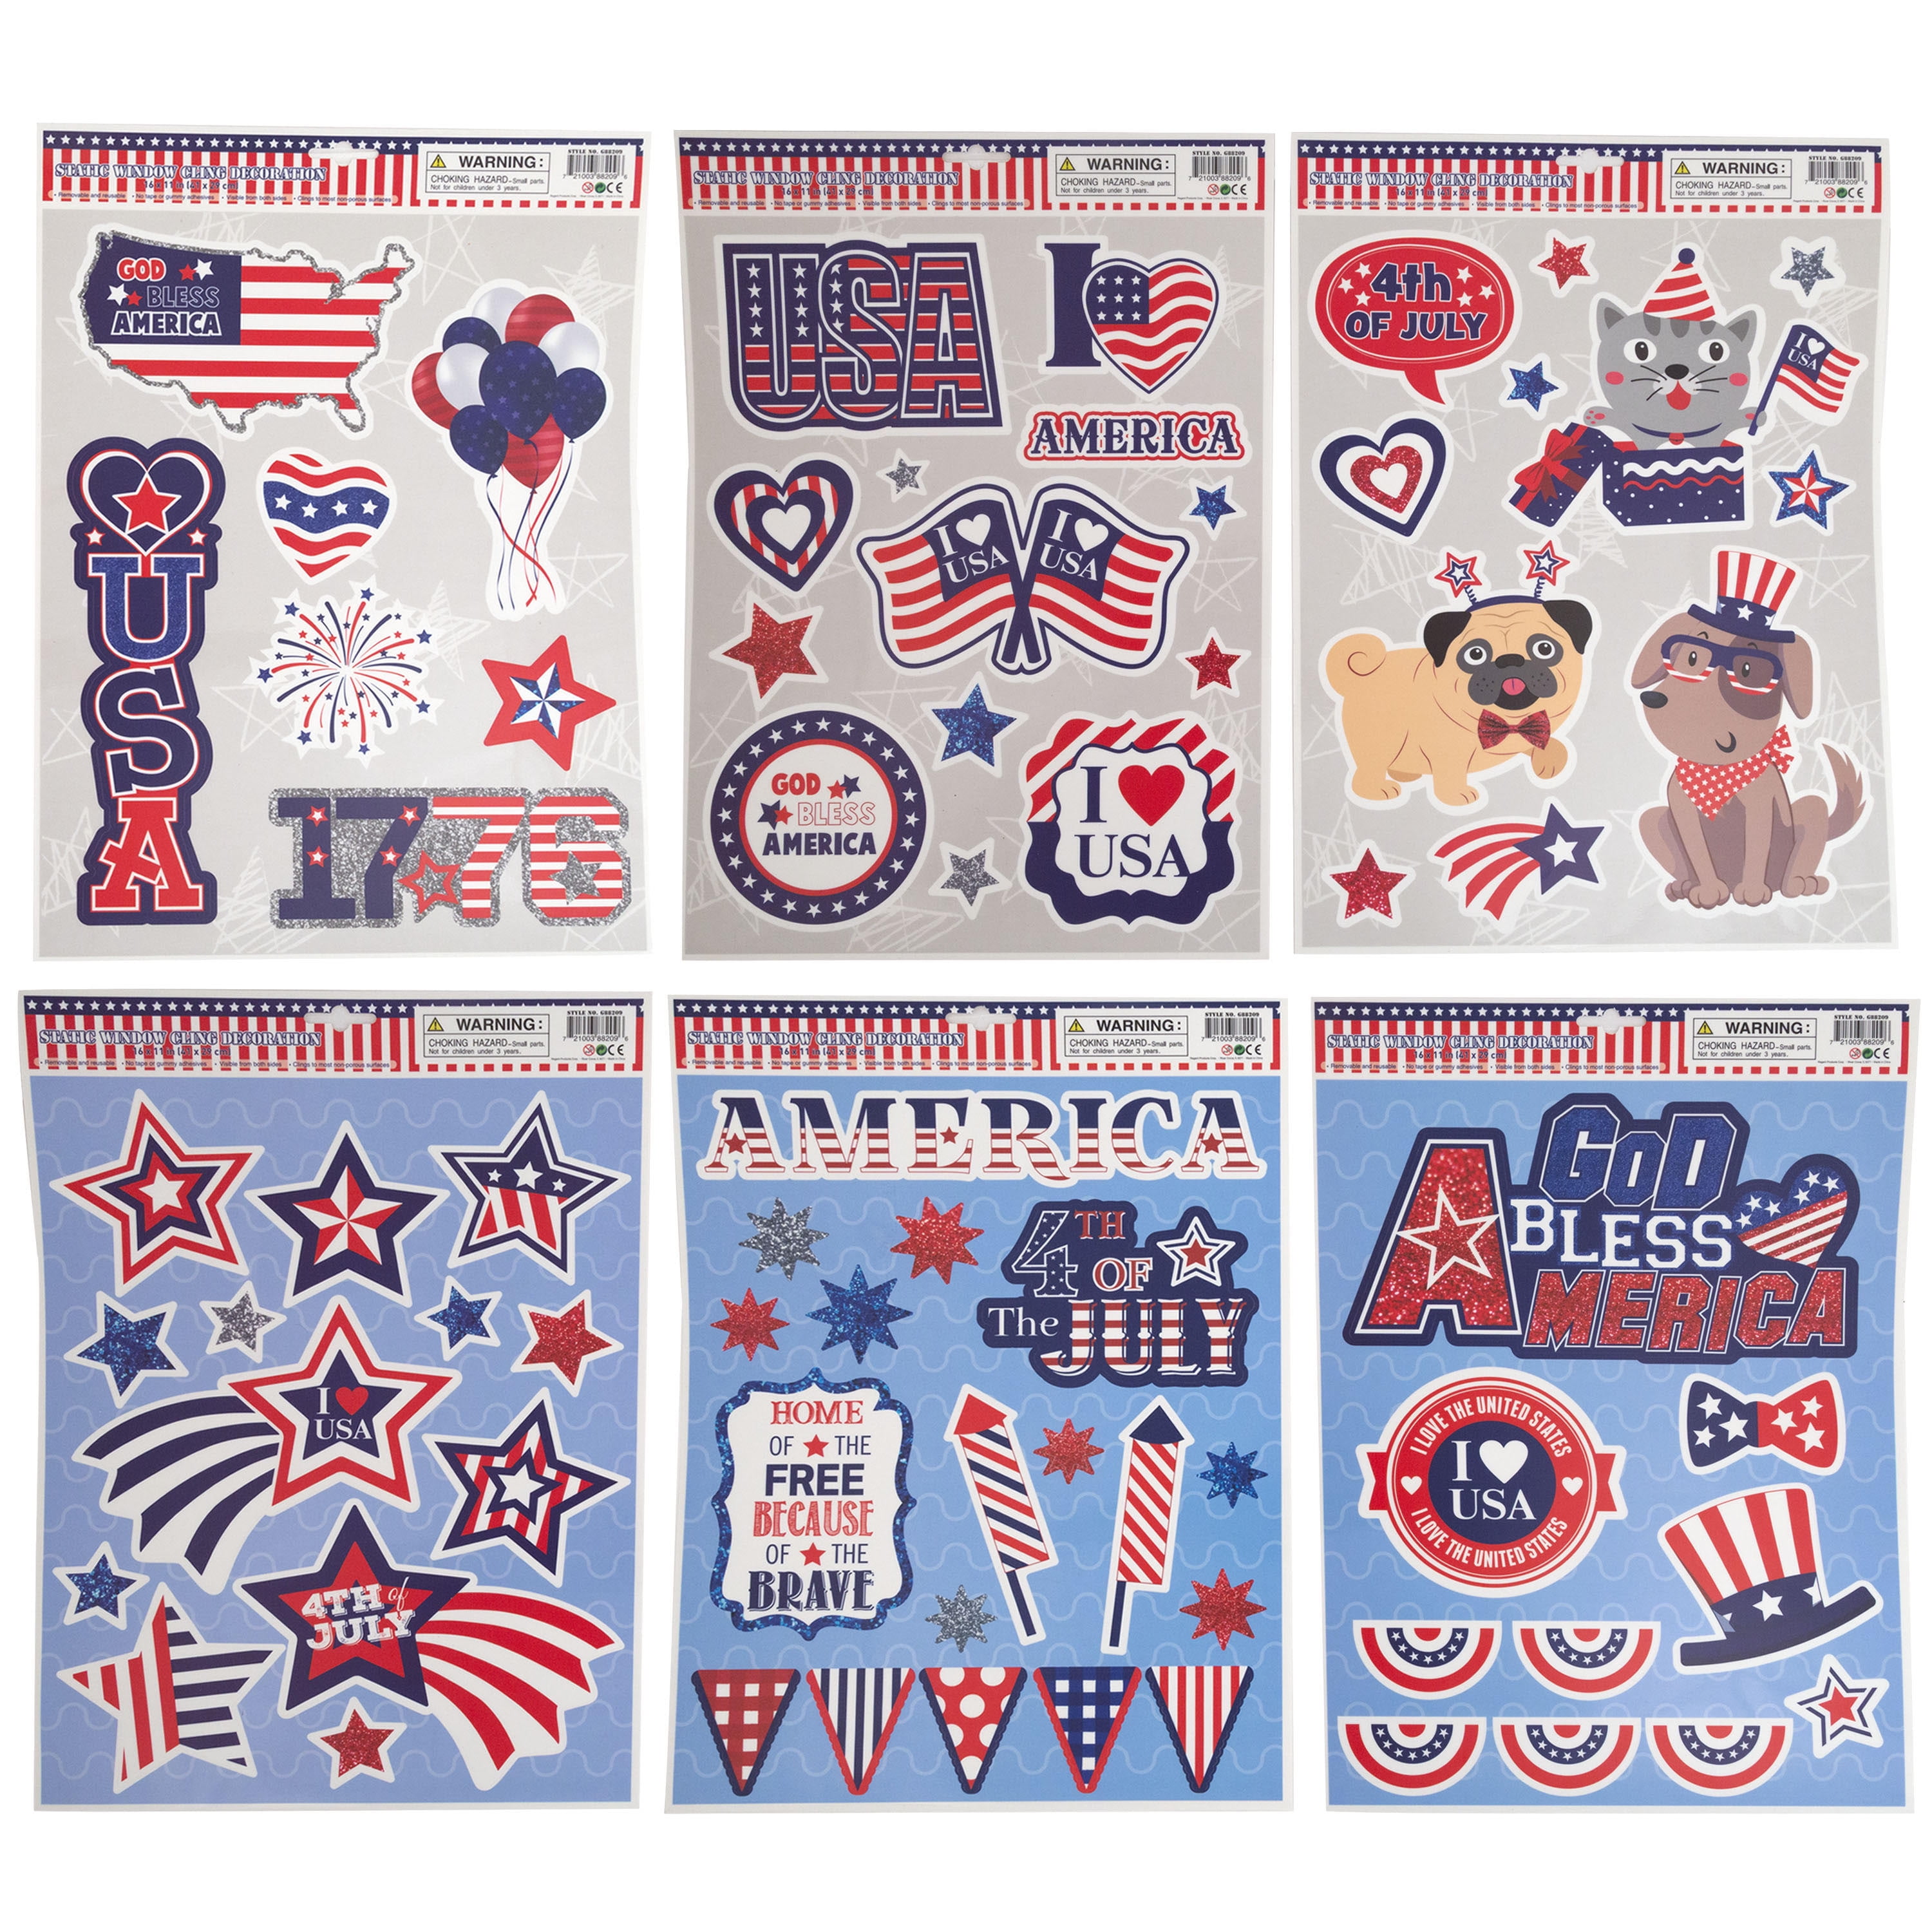 Plum Nellies Treasures Patriotic Window Gel Cling Stickers Decor 4th of July Support Our Troops Election Patriotic Patriotic Set 